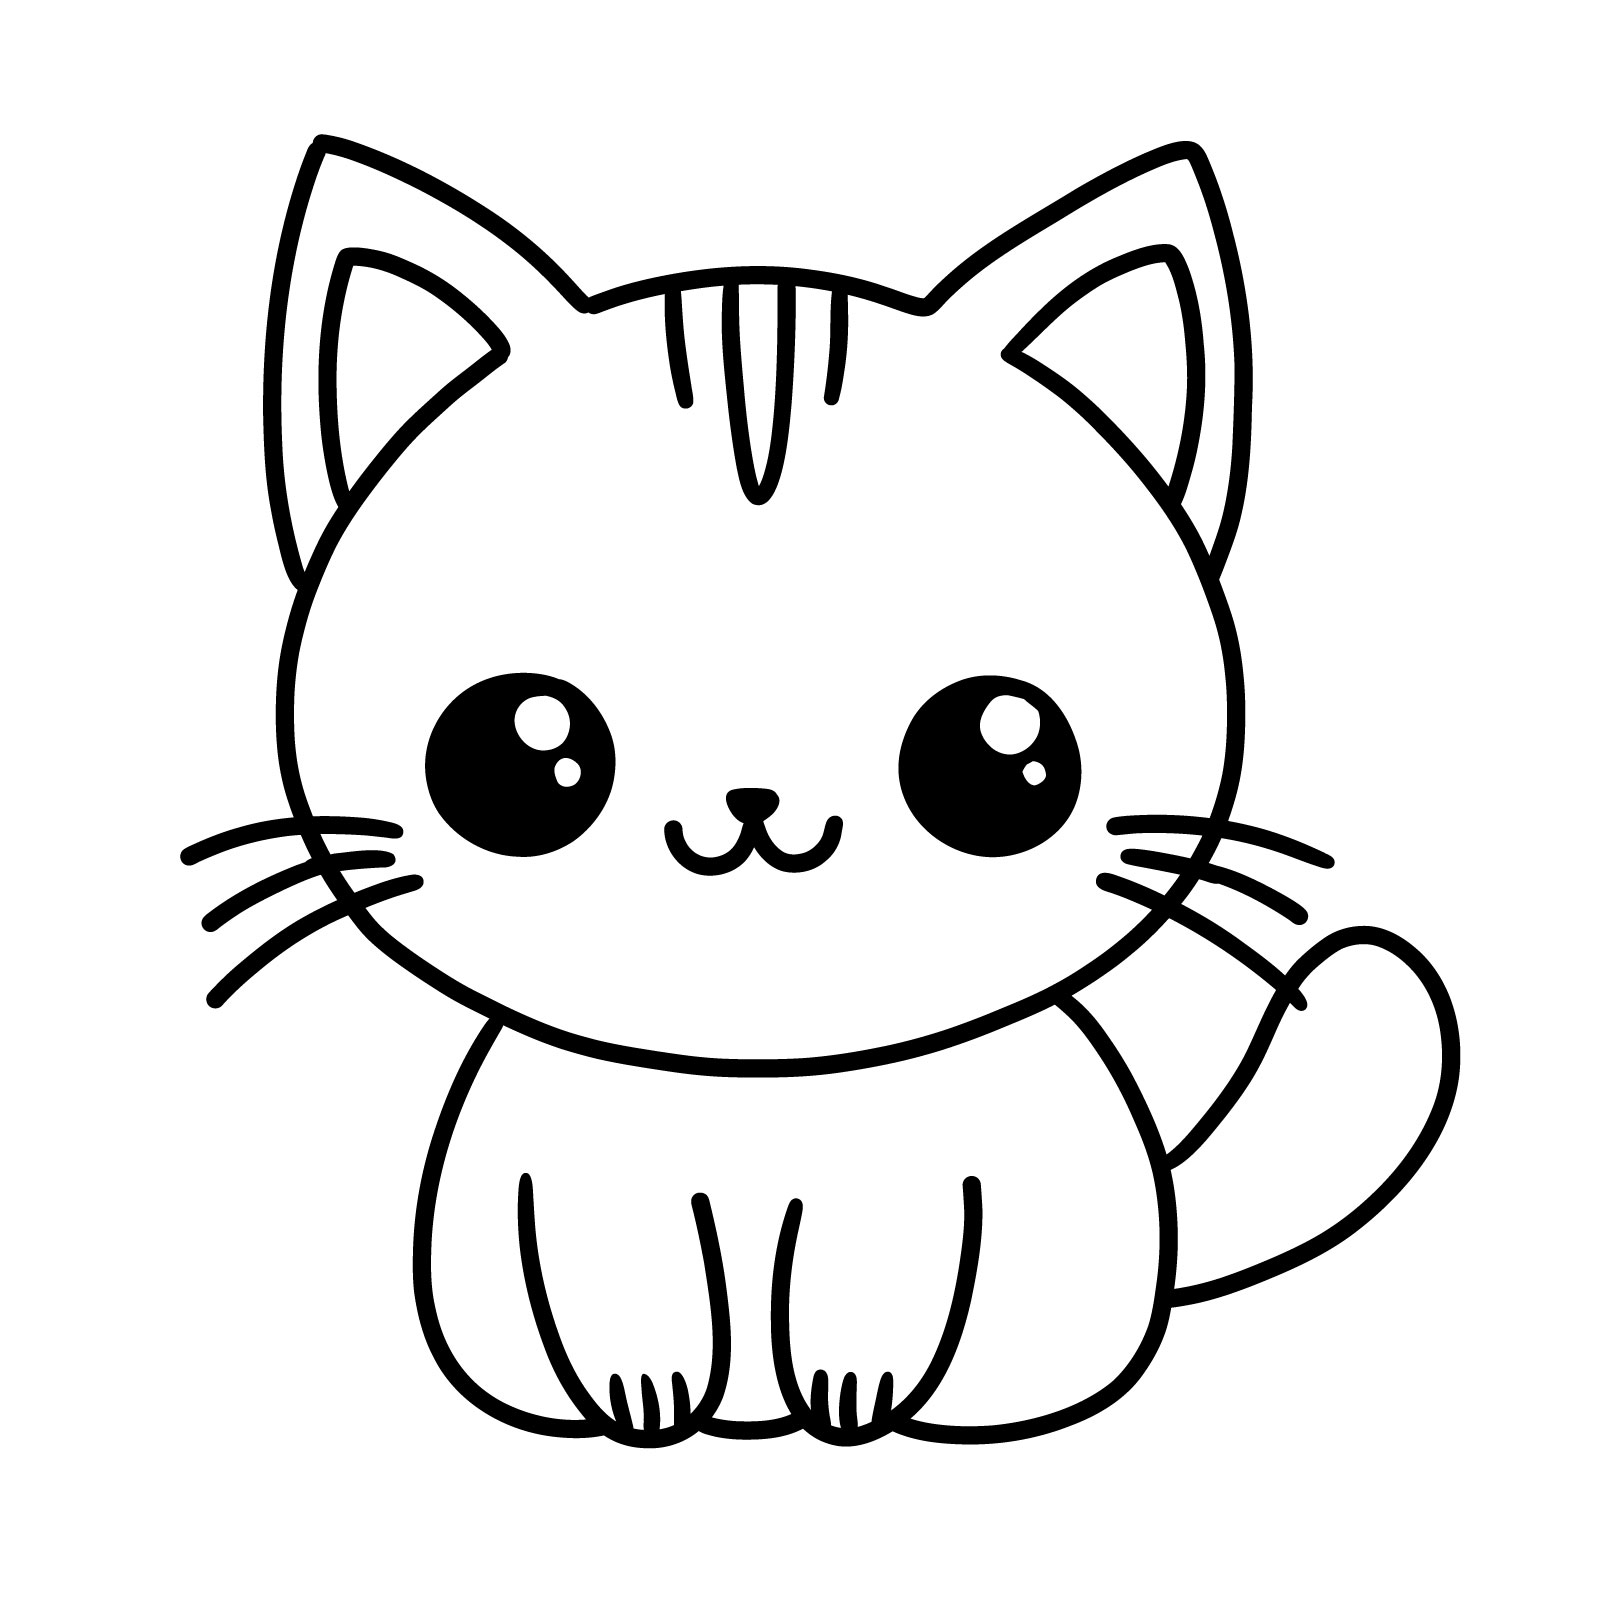 How to draw a Kawaii Cat - the Result